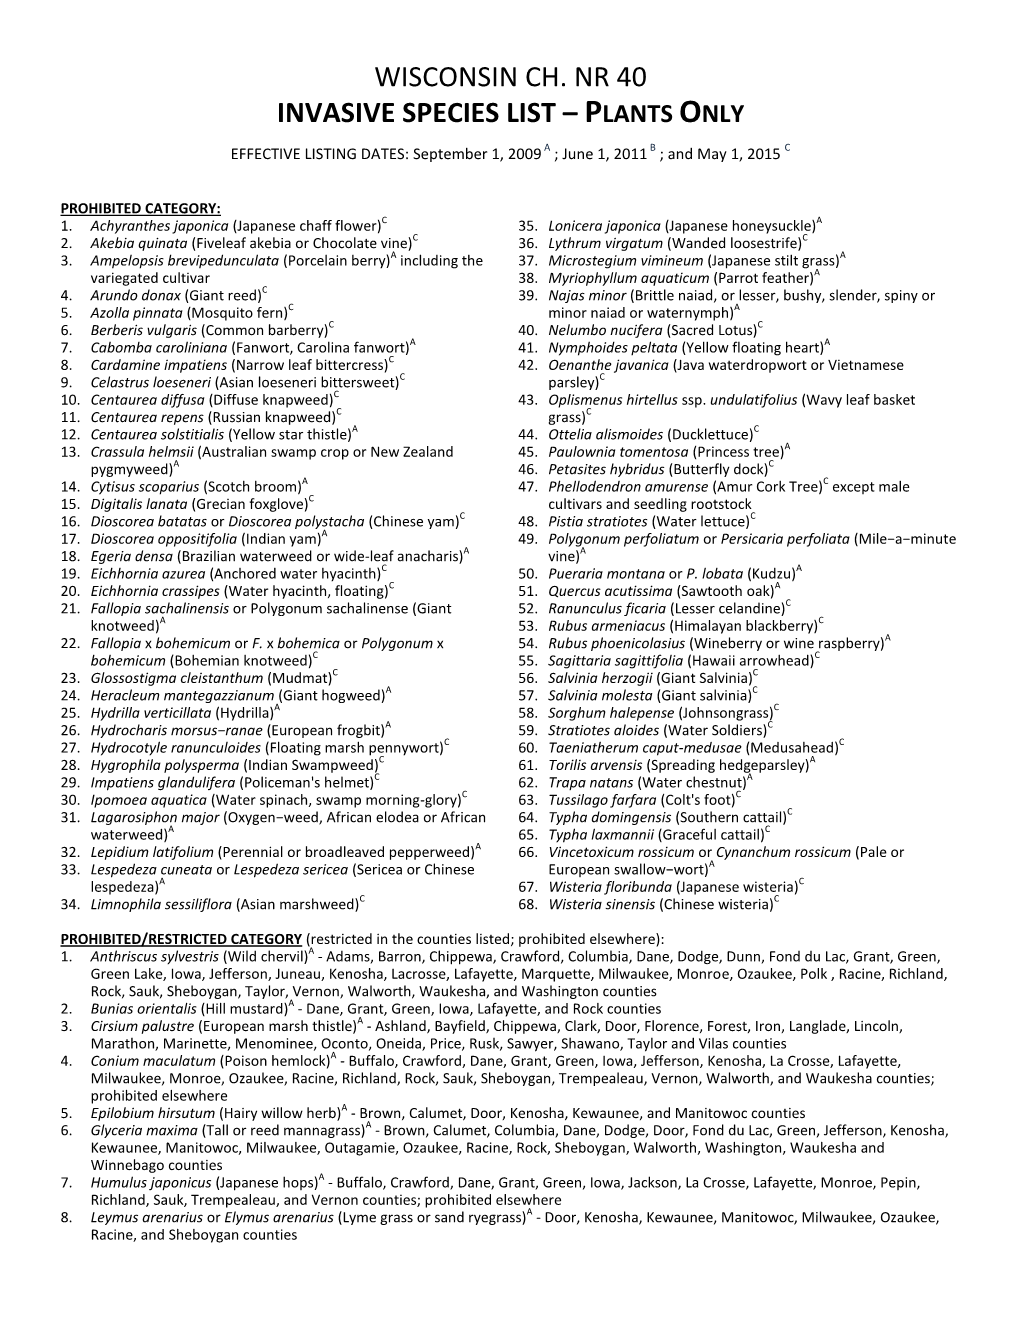 Wisconsin Ch. Nr 40 Invasive Species List – Plants Only